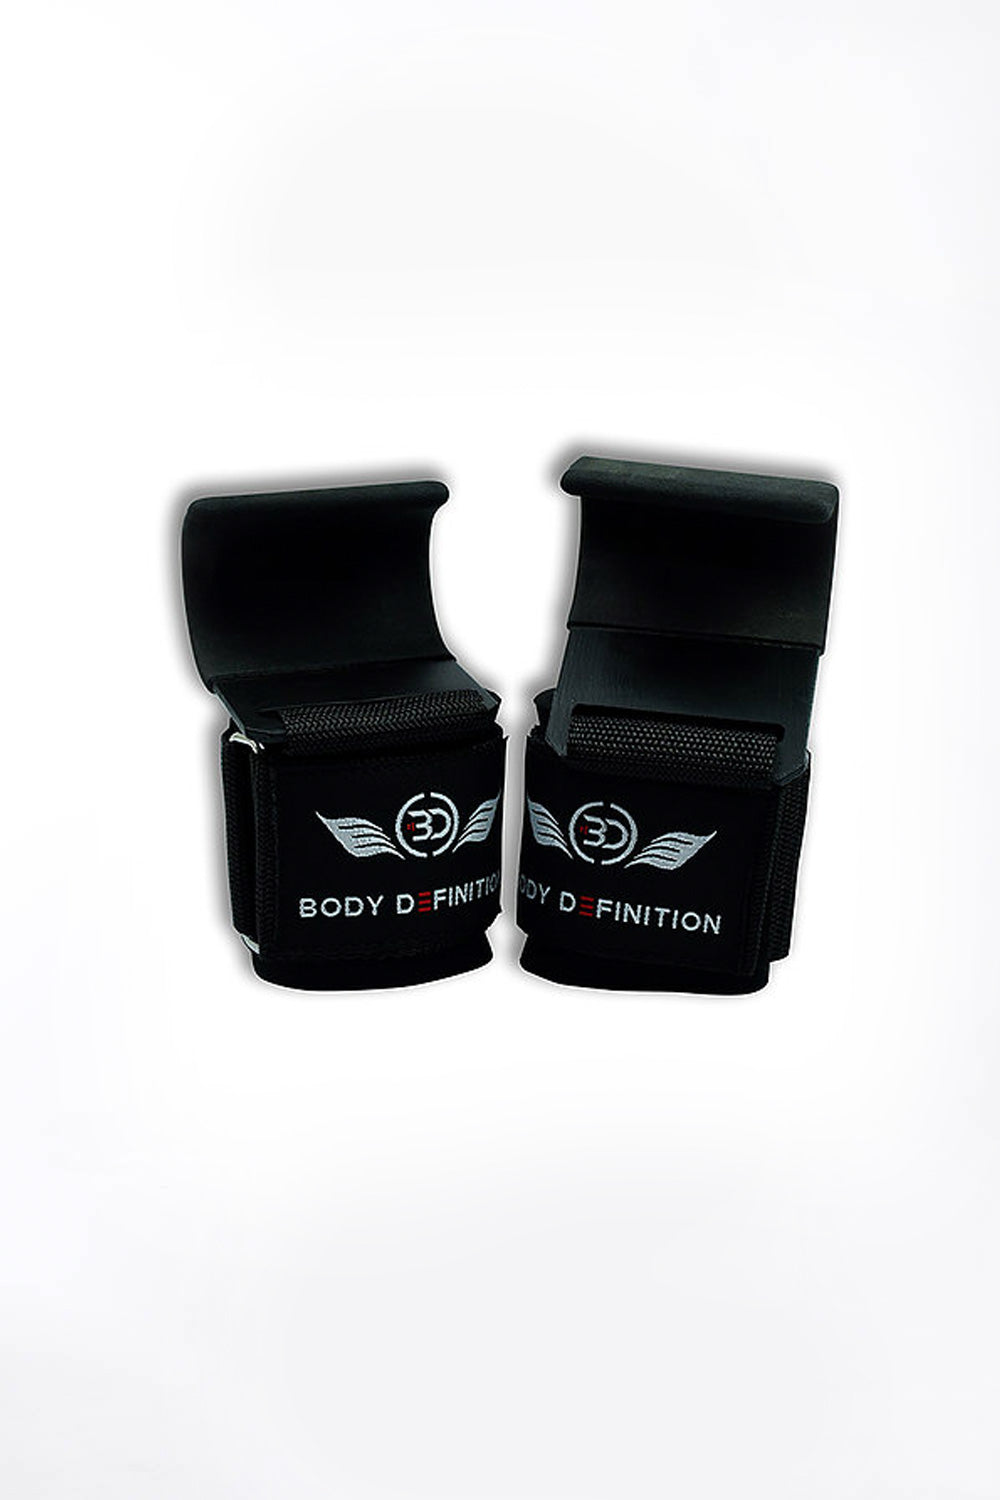 Weight Lifiting Hooks Body Definition